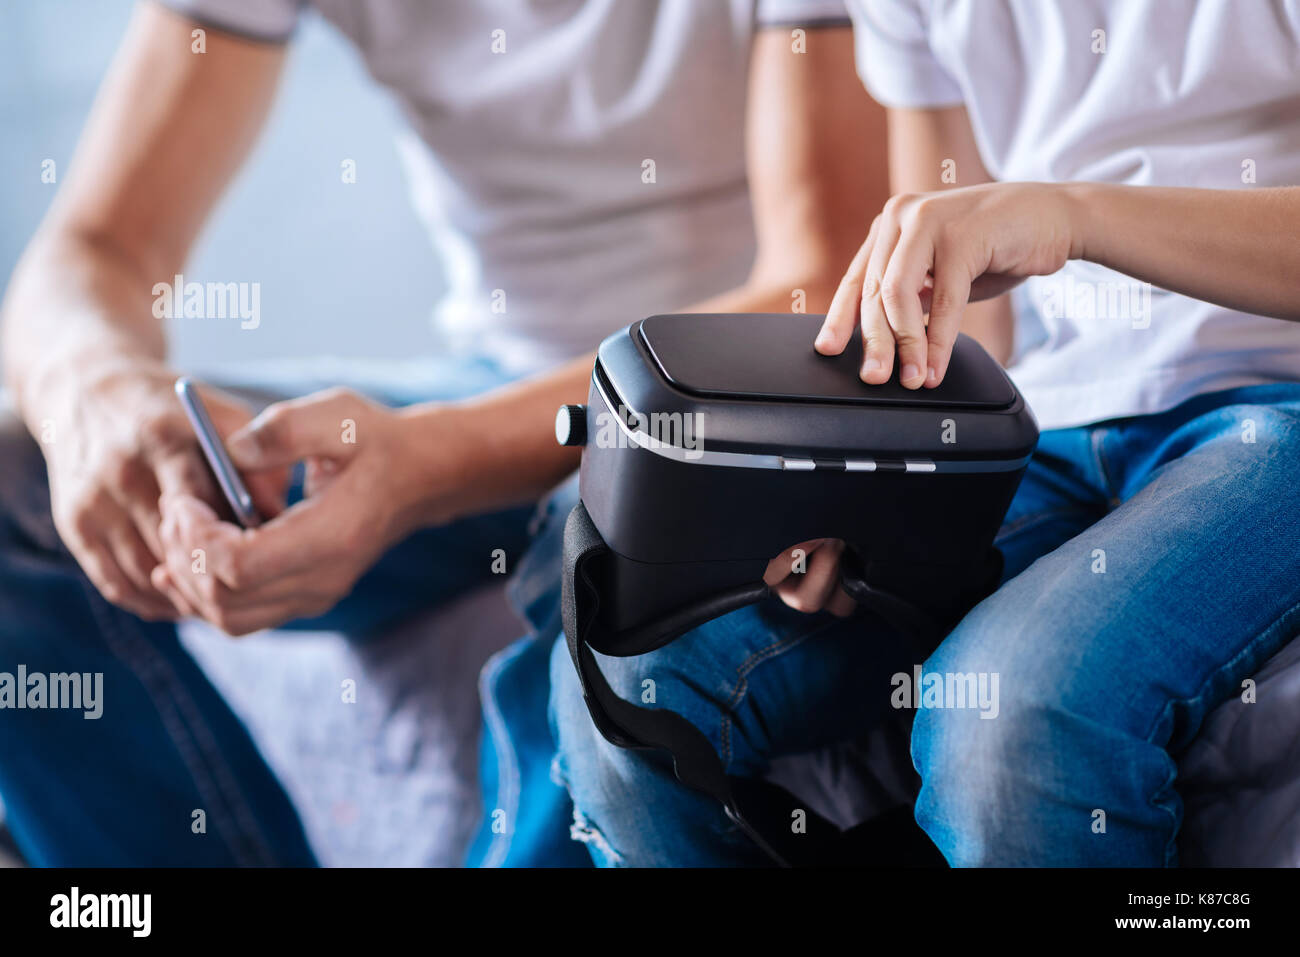 Close up of kids hands opening VR headset Stock Photo